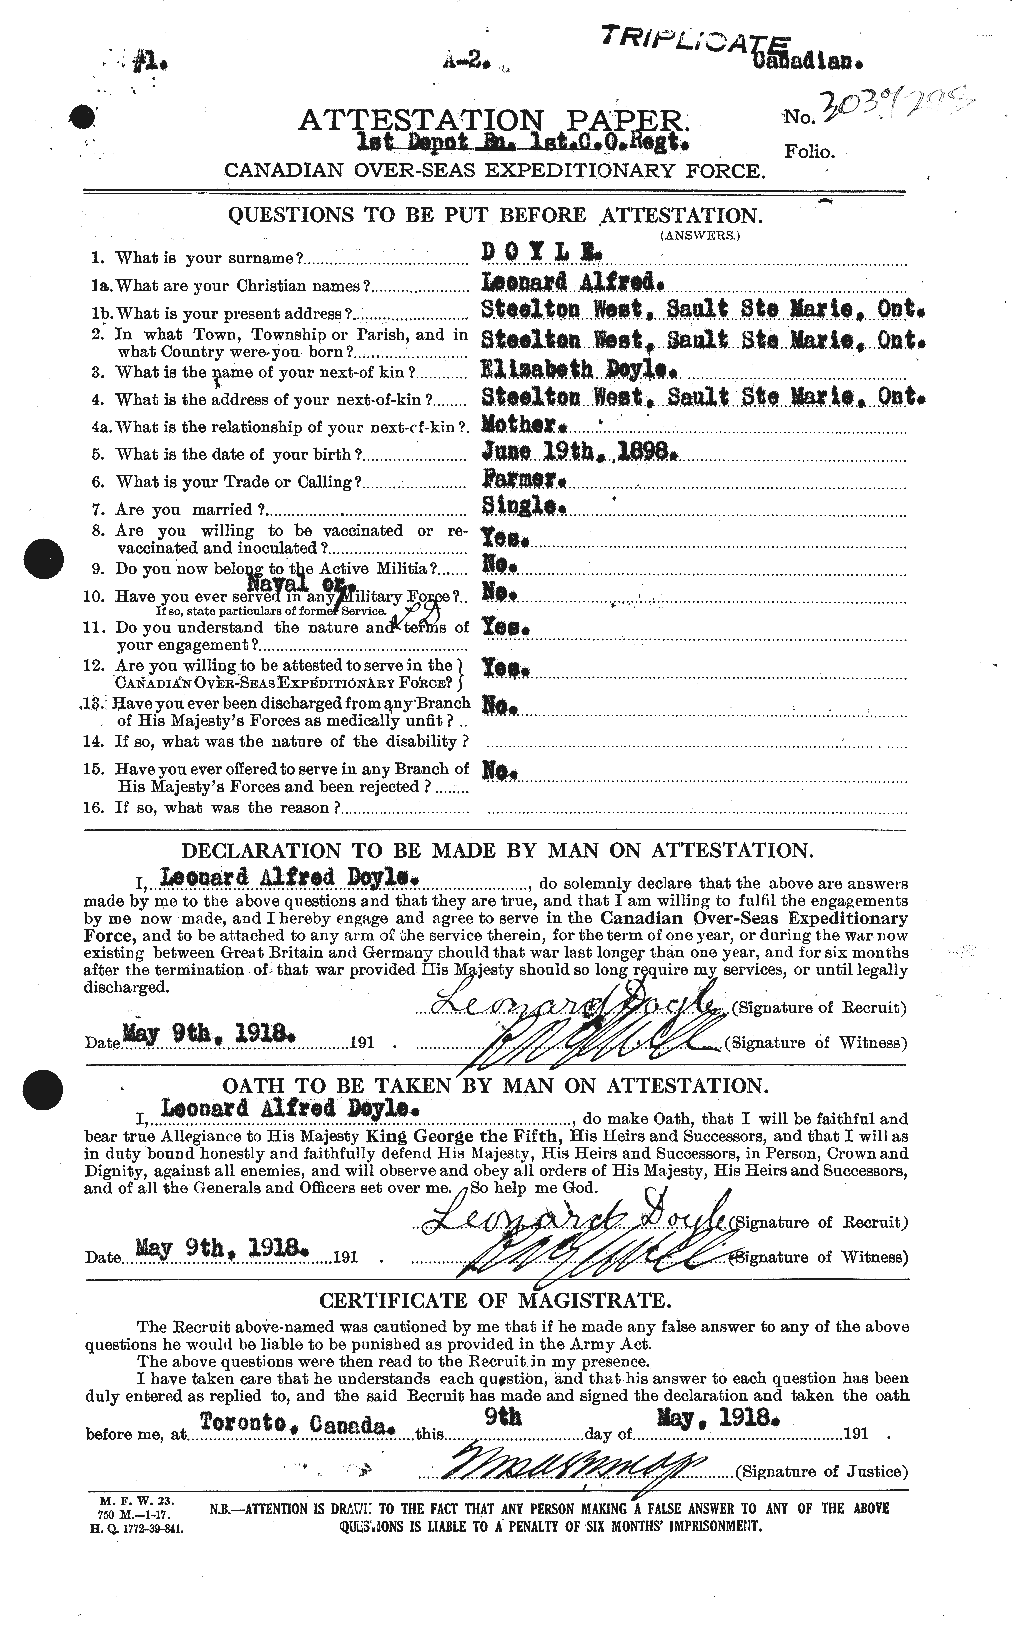 Personnel Records of the First World War - CEF 298635a